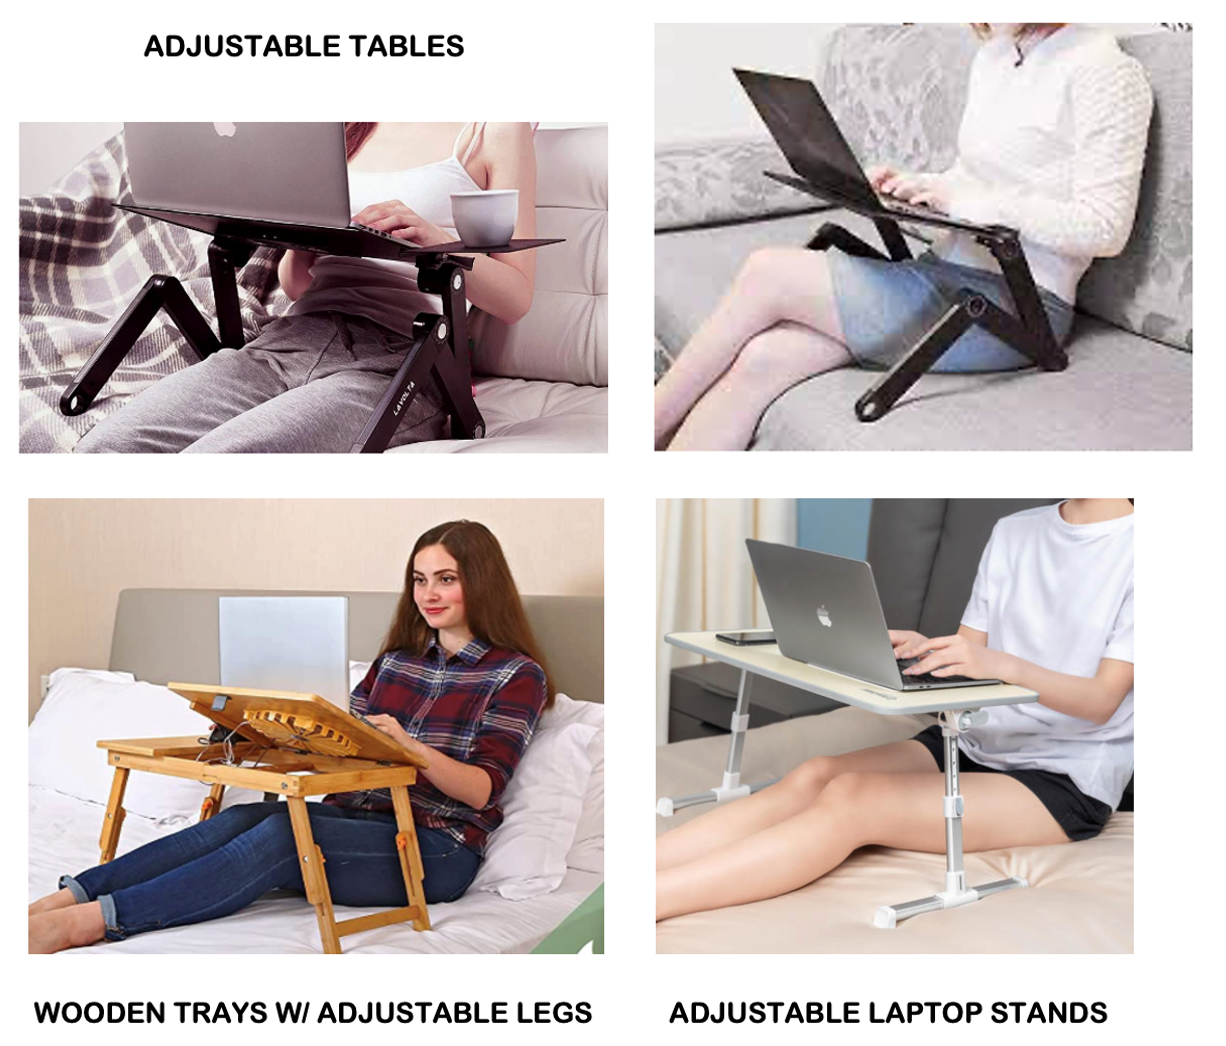 Images adjustable tables, wooden trays with adjustable legs, and adjustable laptop stands